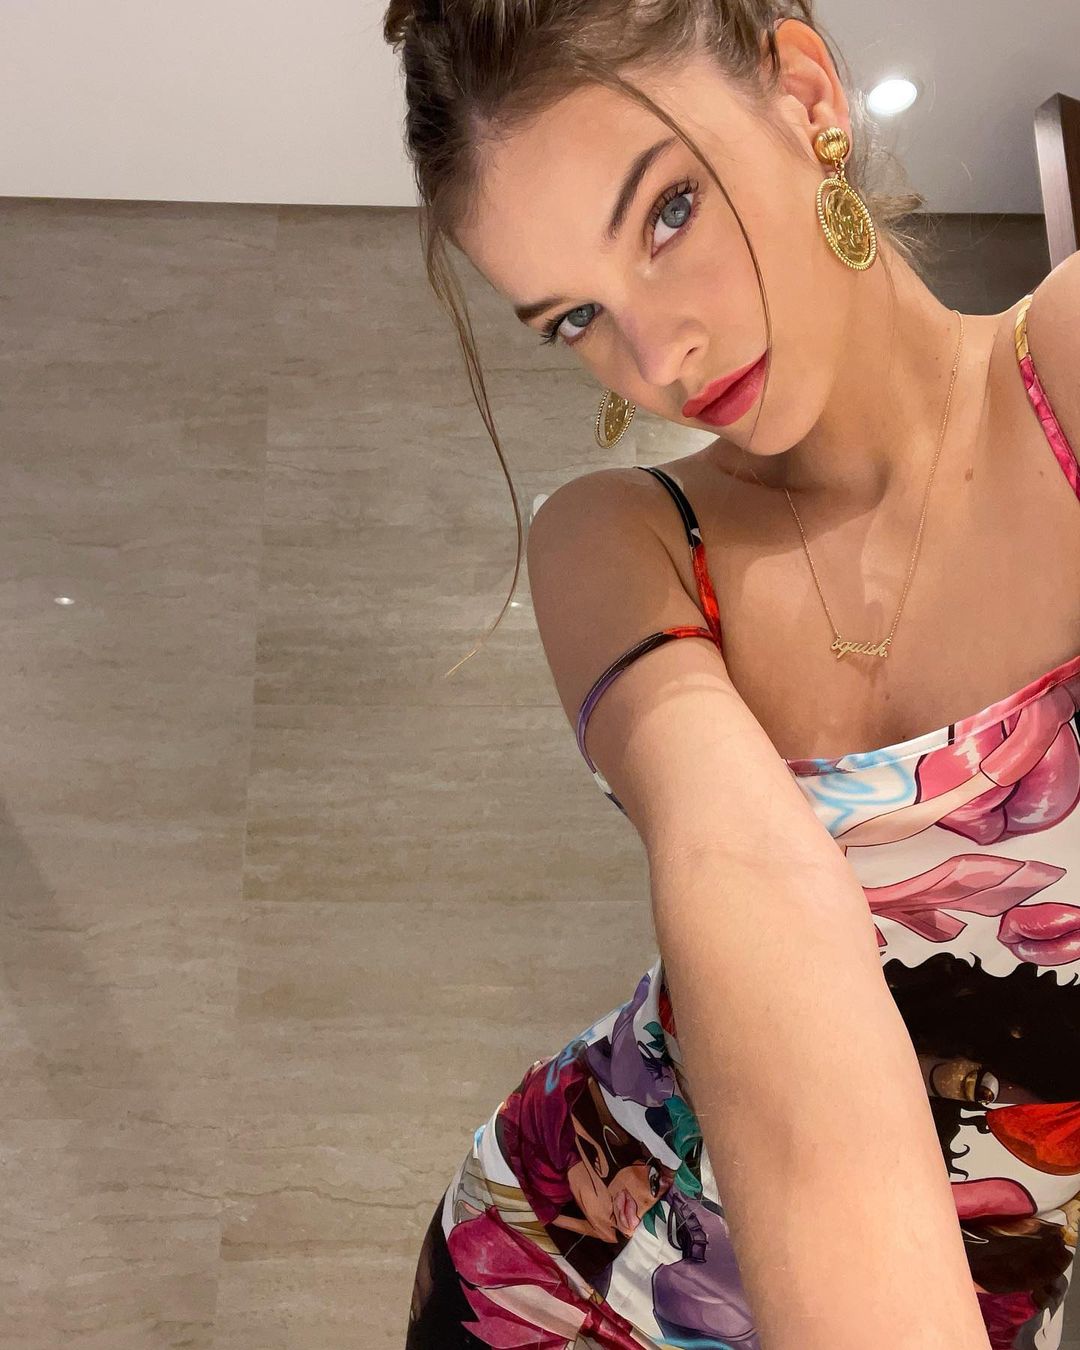 Photos n°1 : Barbara Palvin is Ready for Date Night!